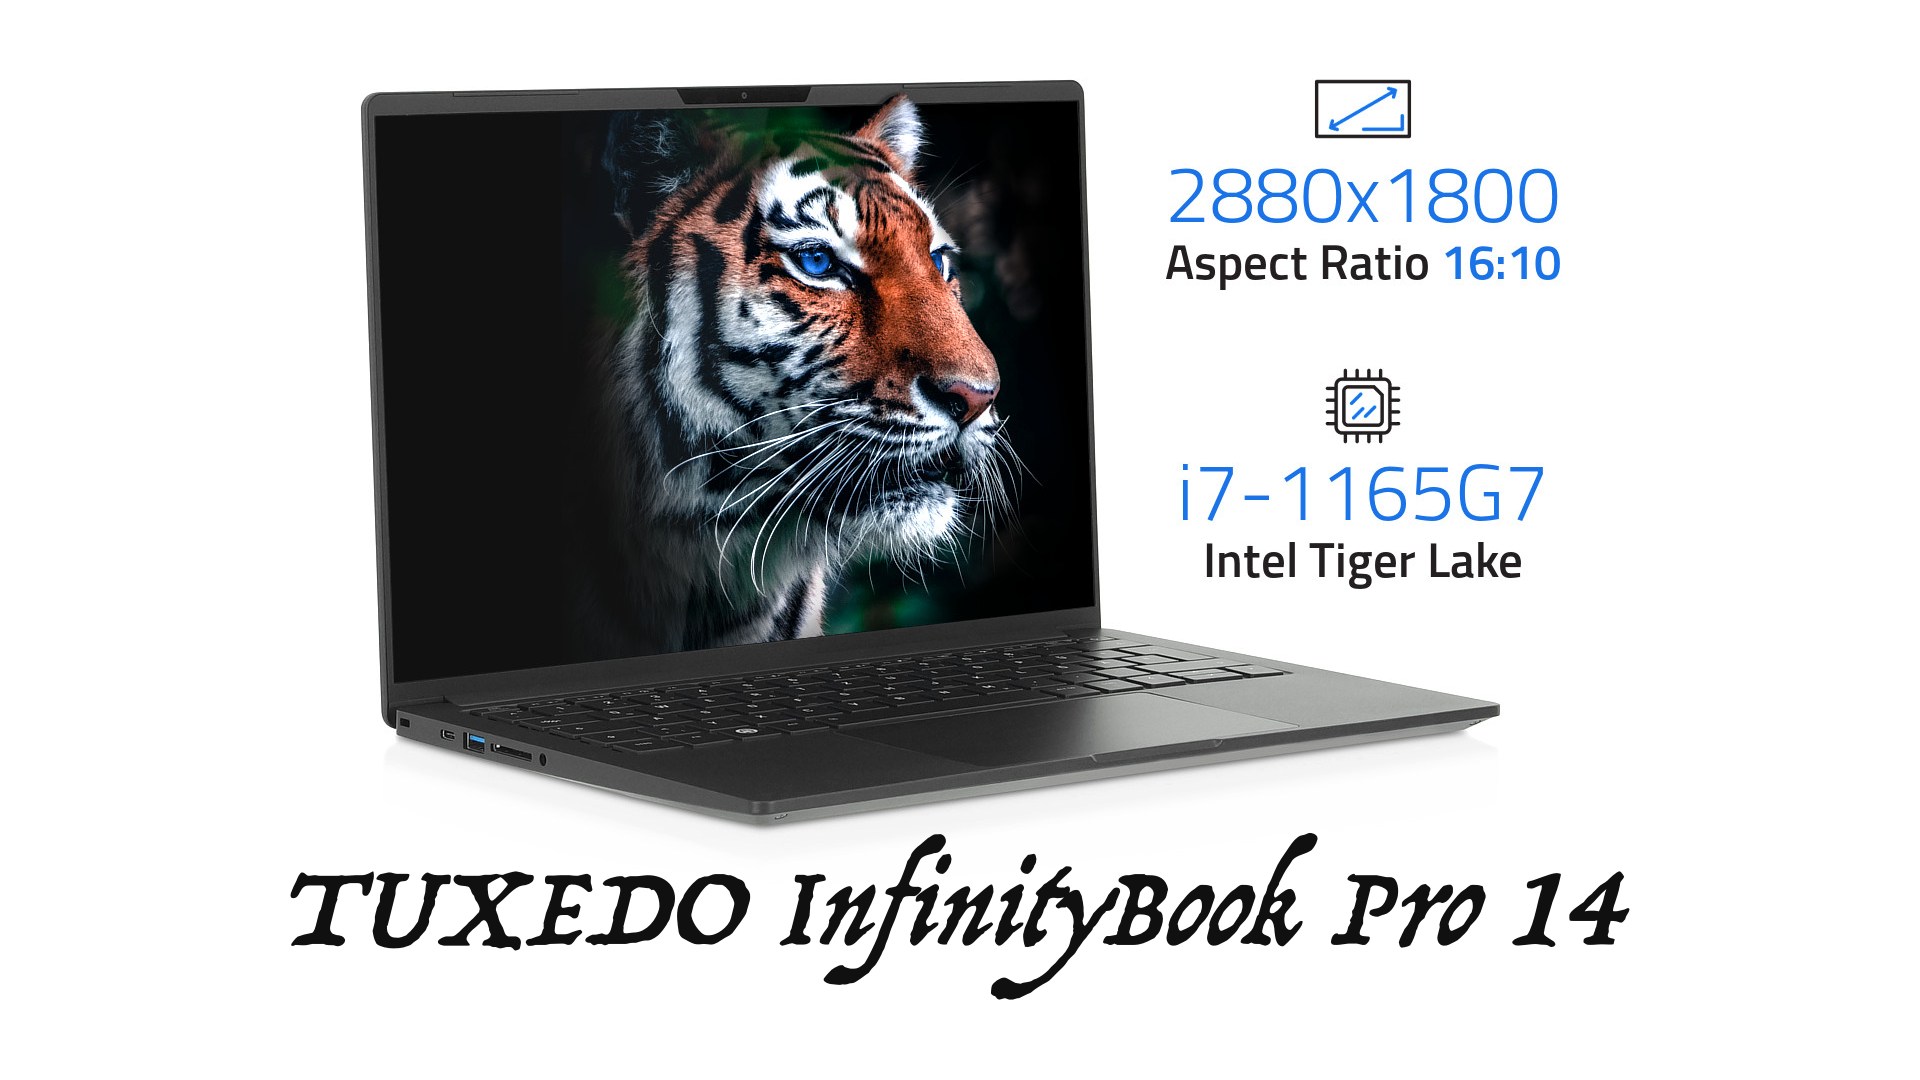 TUXEDO Computers Launches New TUXEDO InfinityBook Pro 14 Linux Laptop with 3K Display